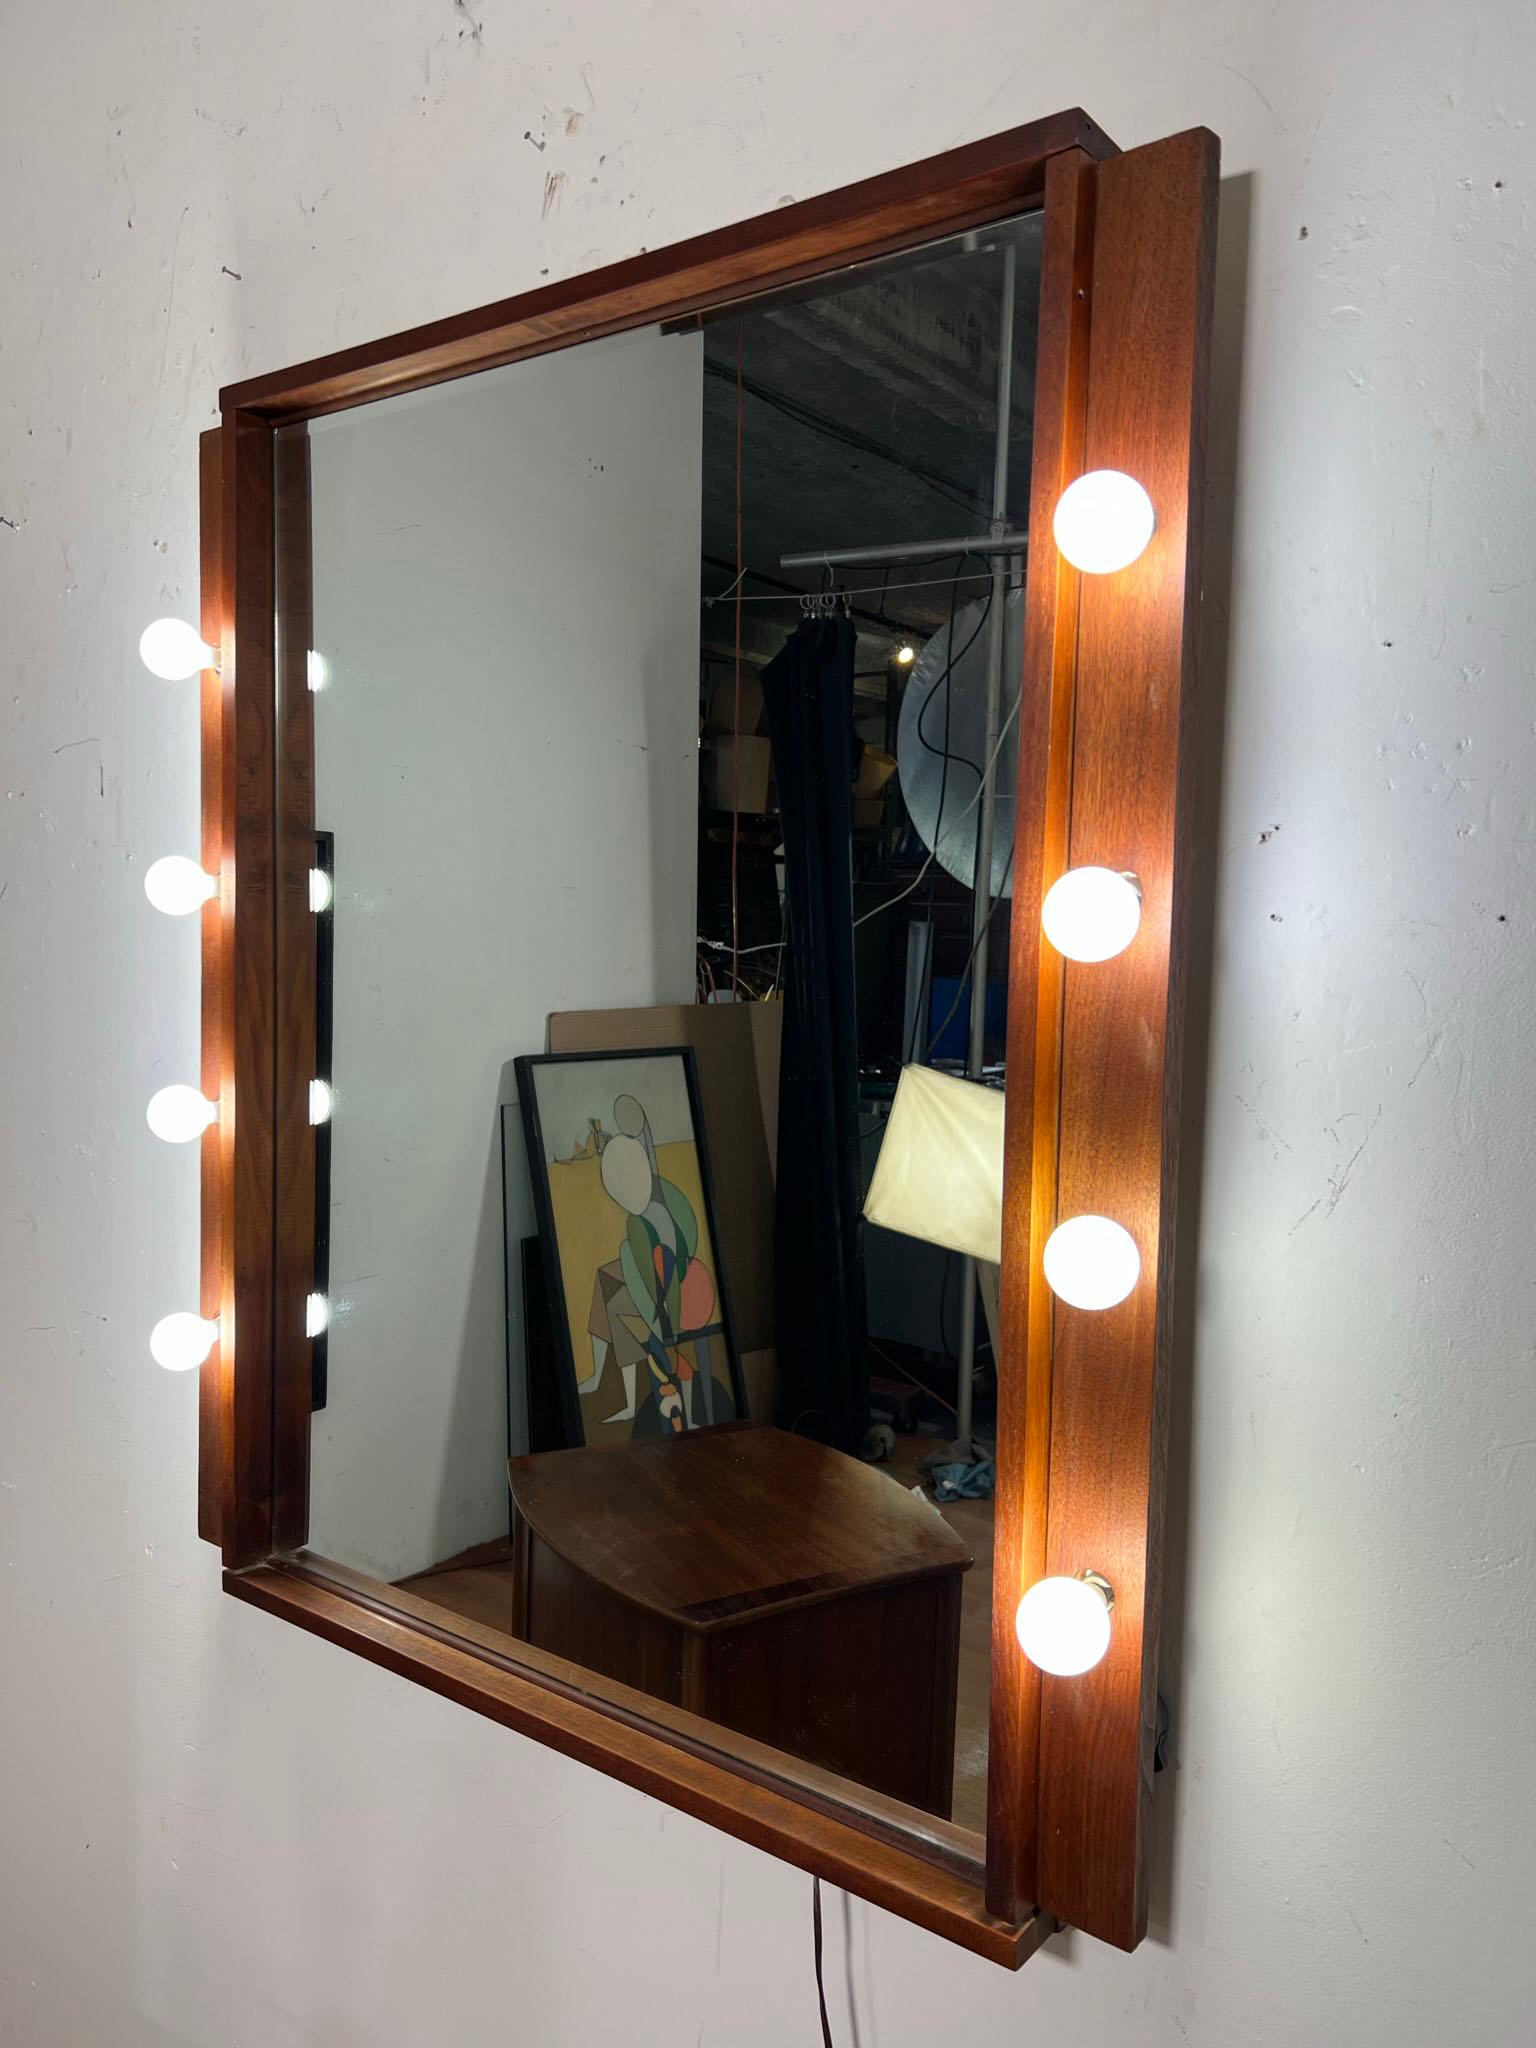 American Craft Made Walnut Wall Mirror with Lighted Vanity Surround, circa 1960s For Sale